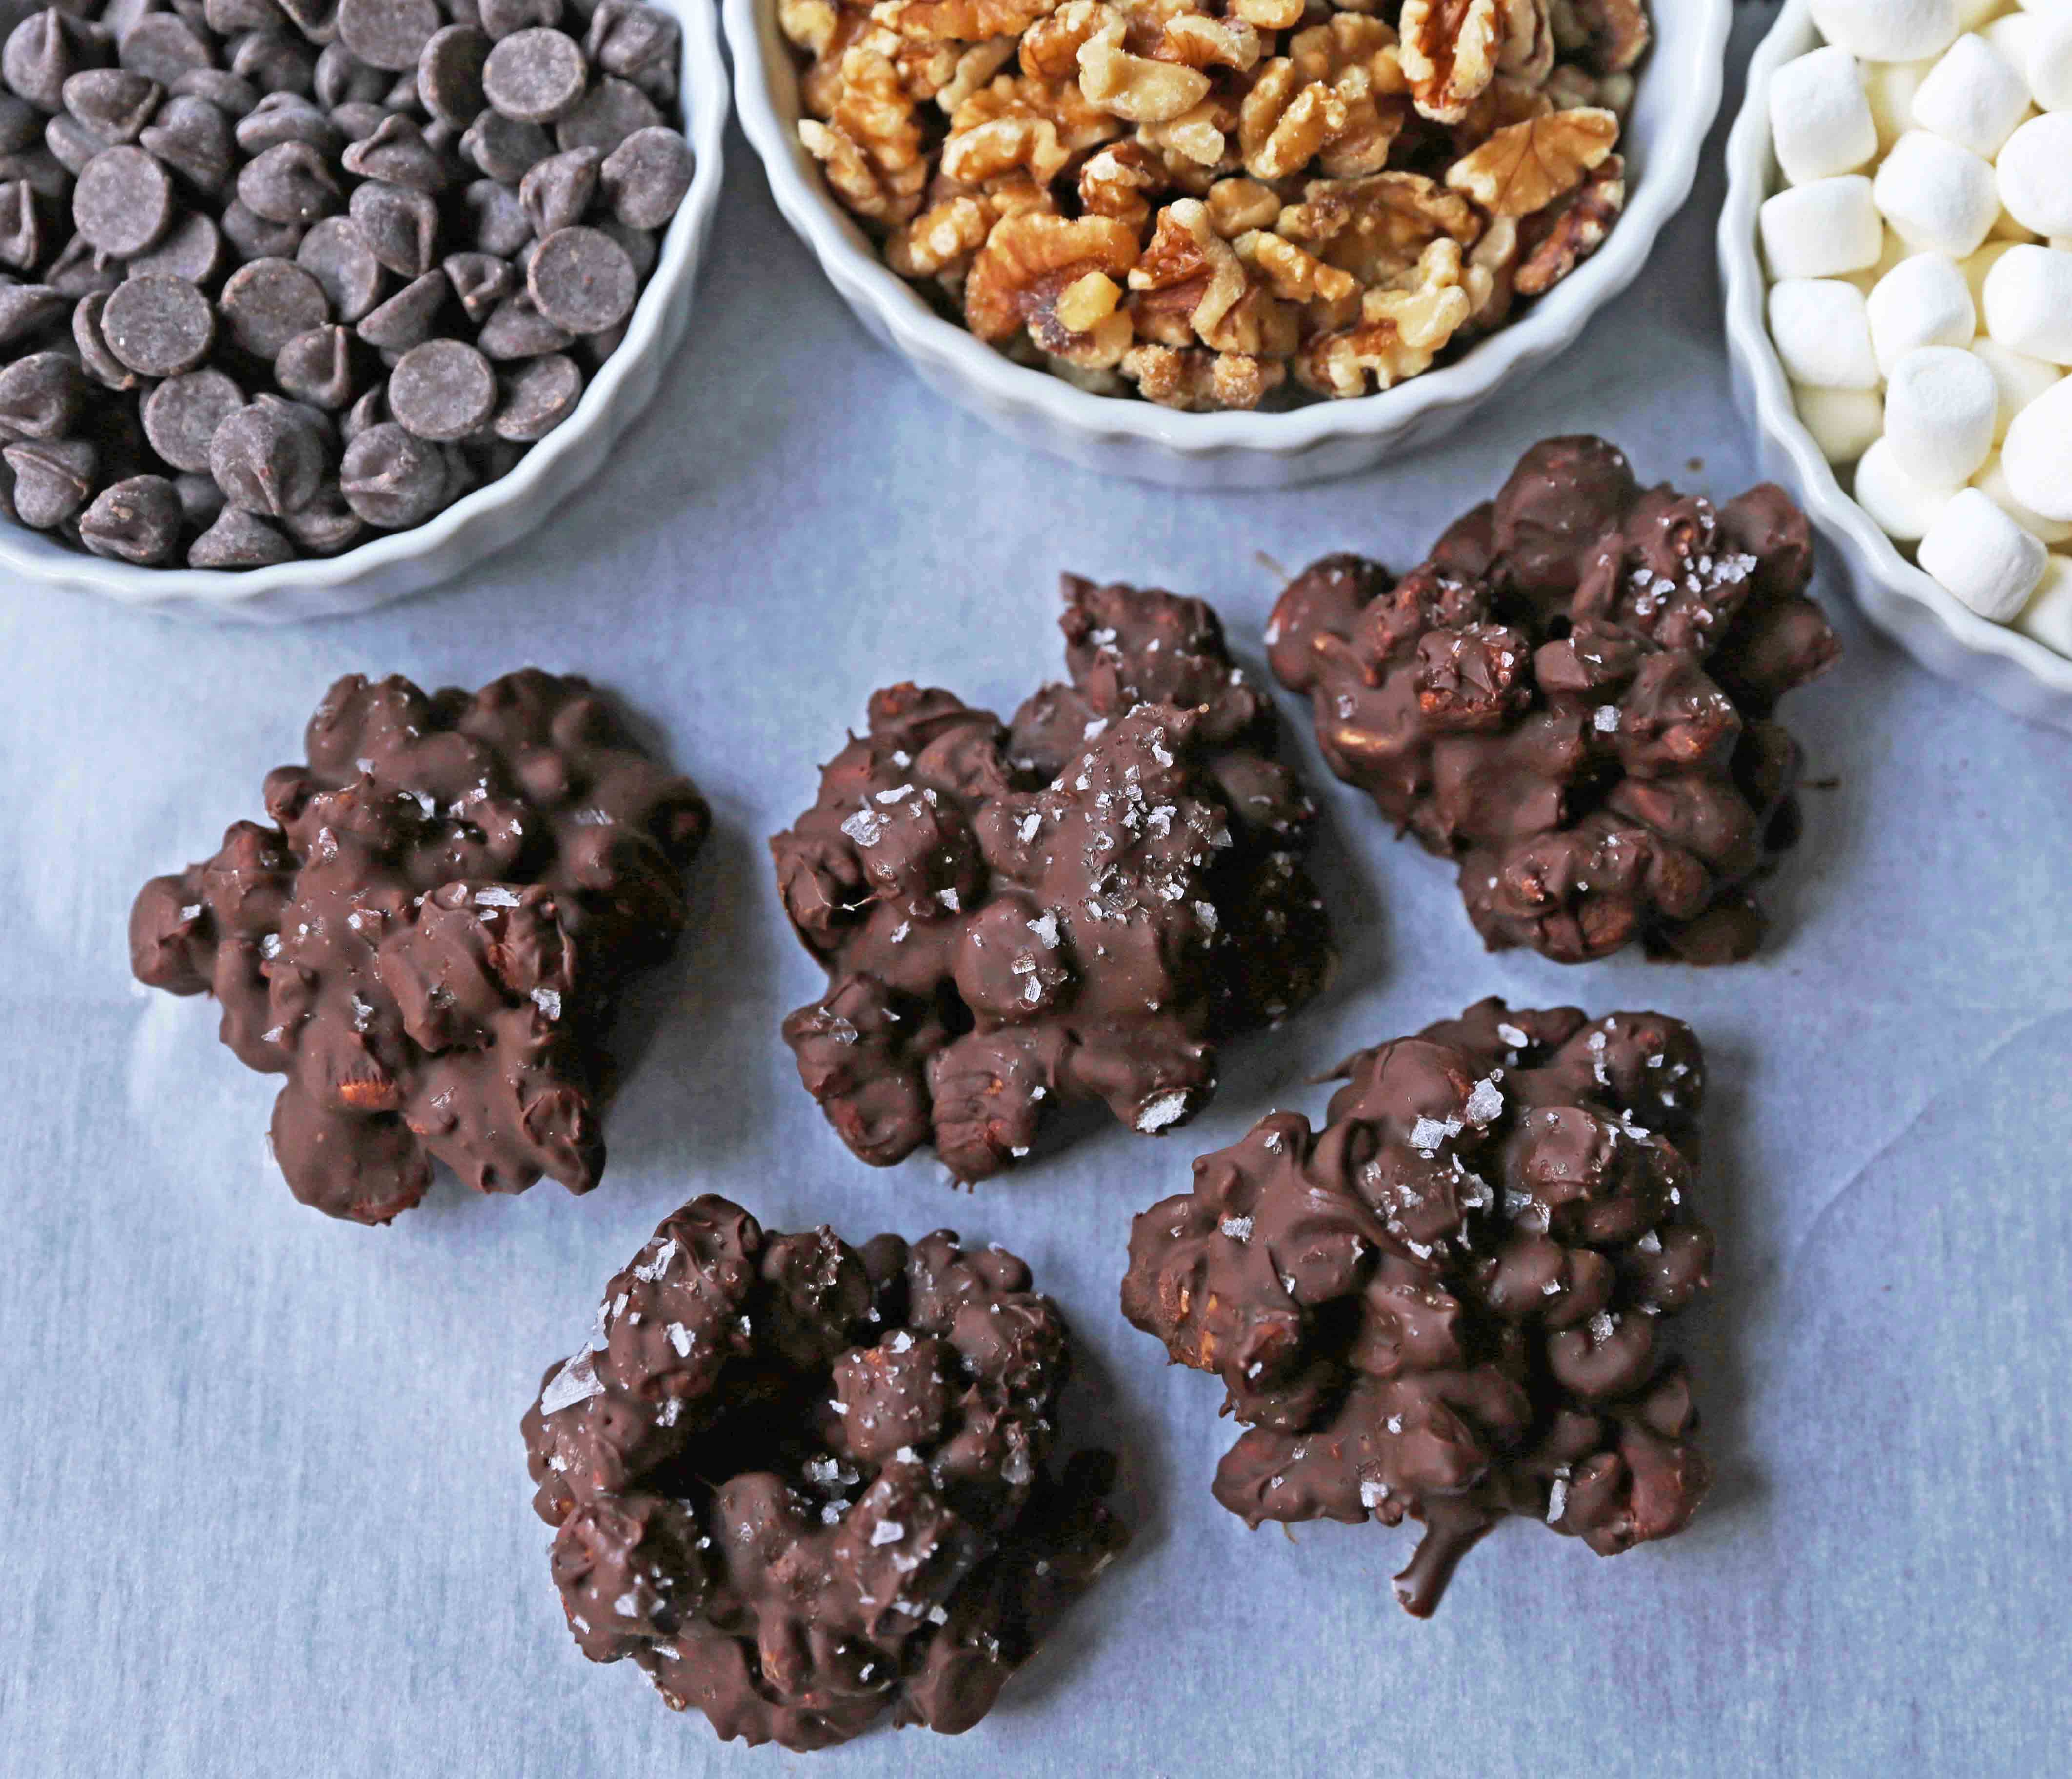 Rocky Road Candy Clusters. Easy no-bake 5-ingredients rocky road clusters made with chocolate, butterscotch, walnuts, and marshmallows. Microwave 5-ingredient Christmas candy recipe. www.modernhoney.com #chocolate #microwavecandy #5ingredients #christmascandy #rockyroad #rockyroadcandy #rockyroadclusters #chocolatemarshmallow